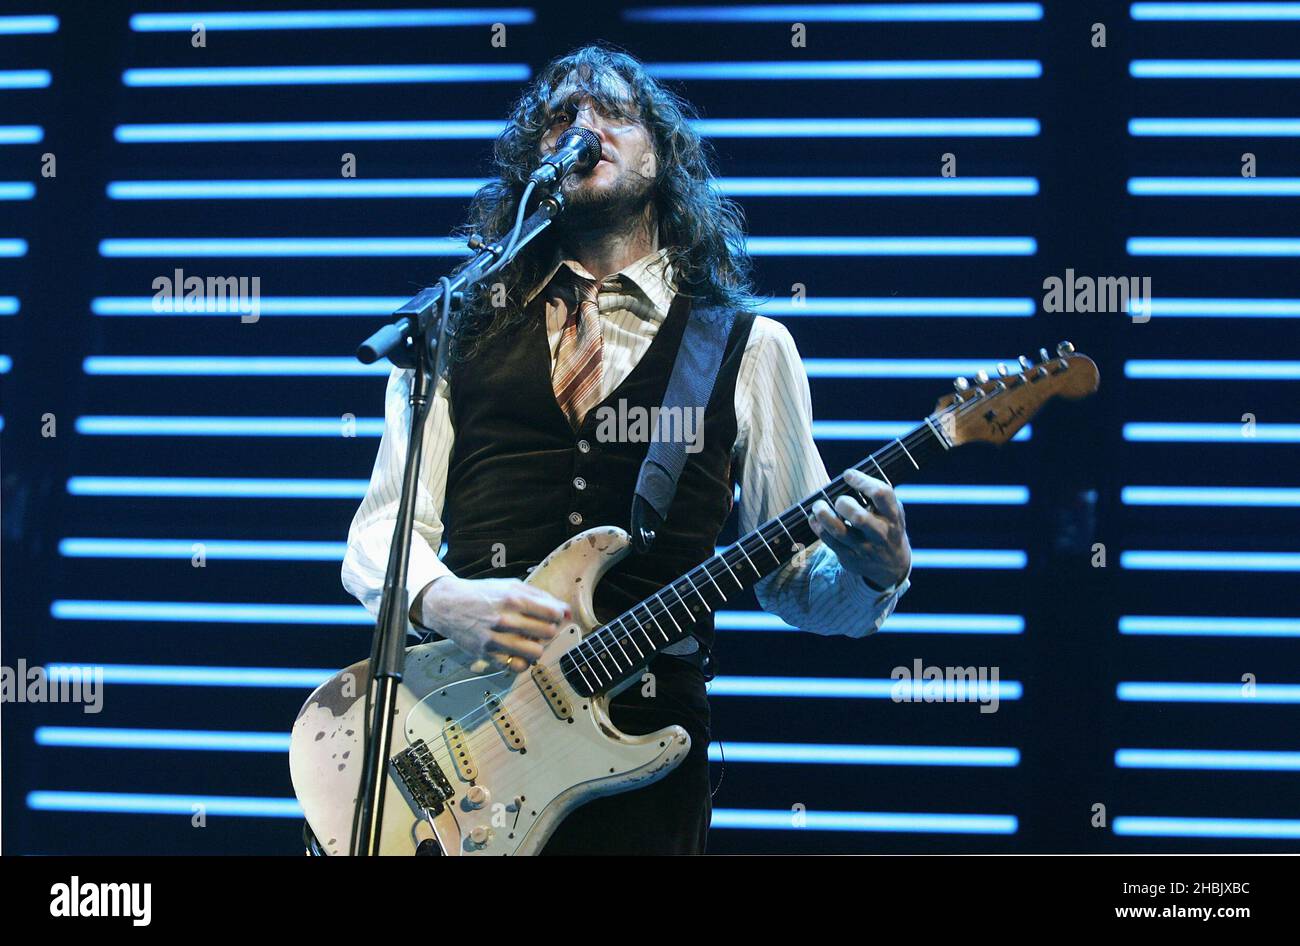 John Frusciante of Red Hot Chili Peppers live on stage. Stock Photo